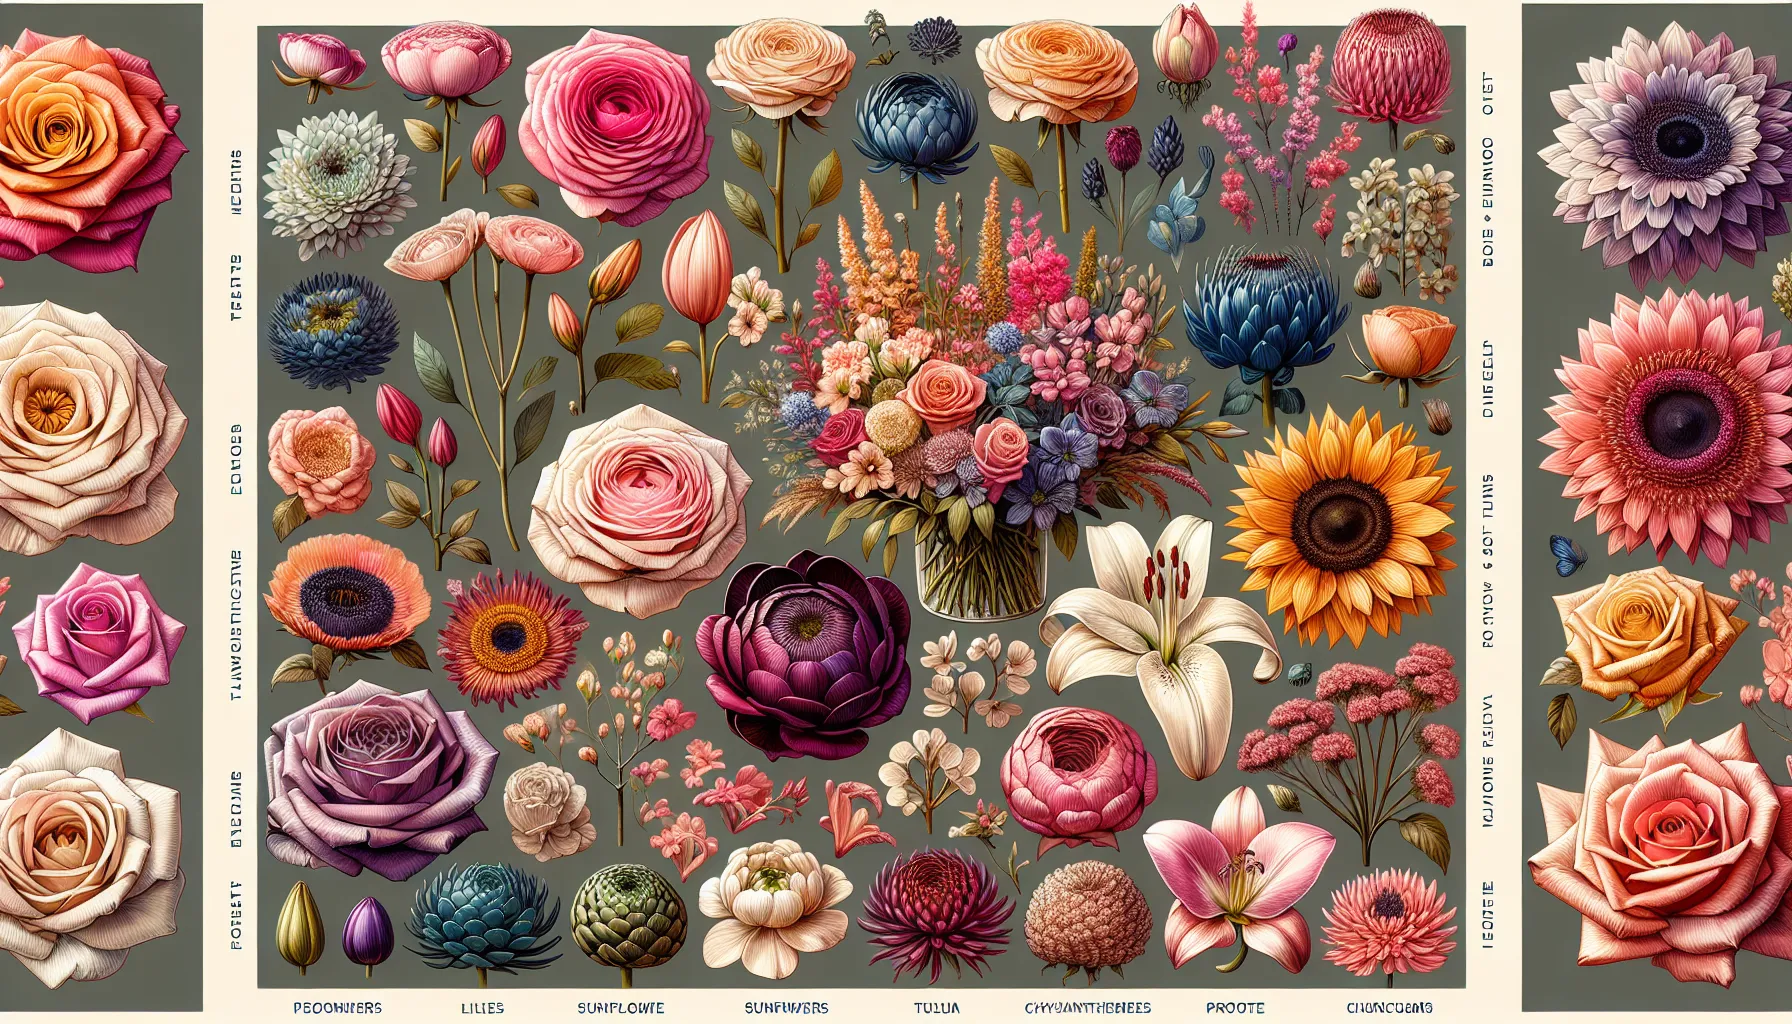 Alt text: An illustration showcasing a variety of types of flowers for bouquets, including roses, lilies, sunflowers, and tulips with labels in different languages.